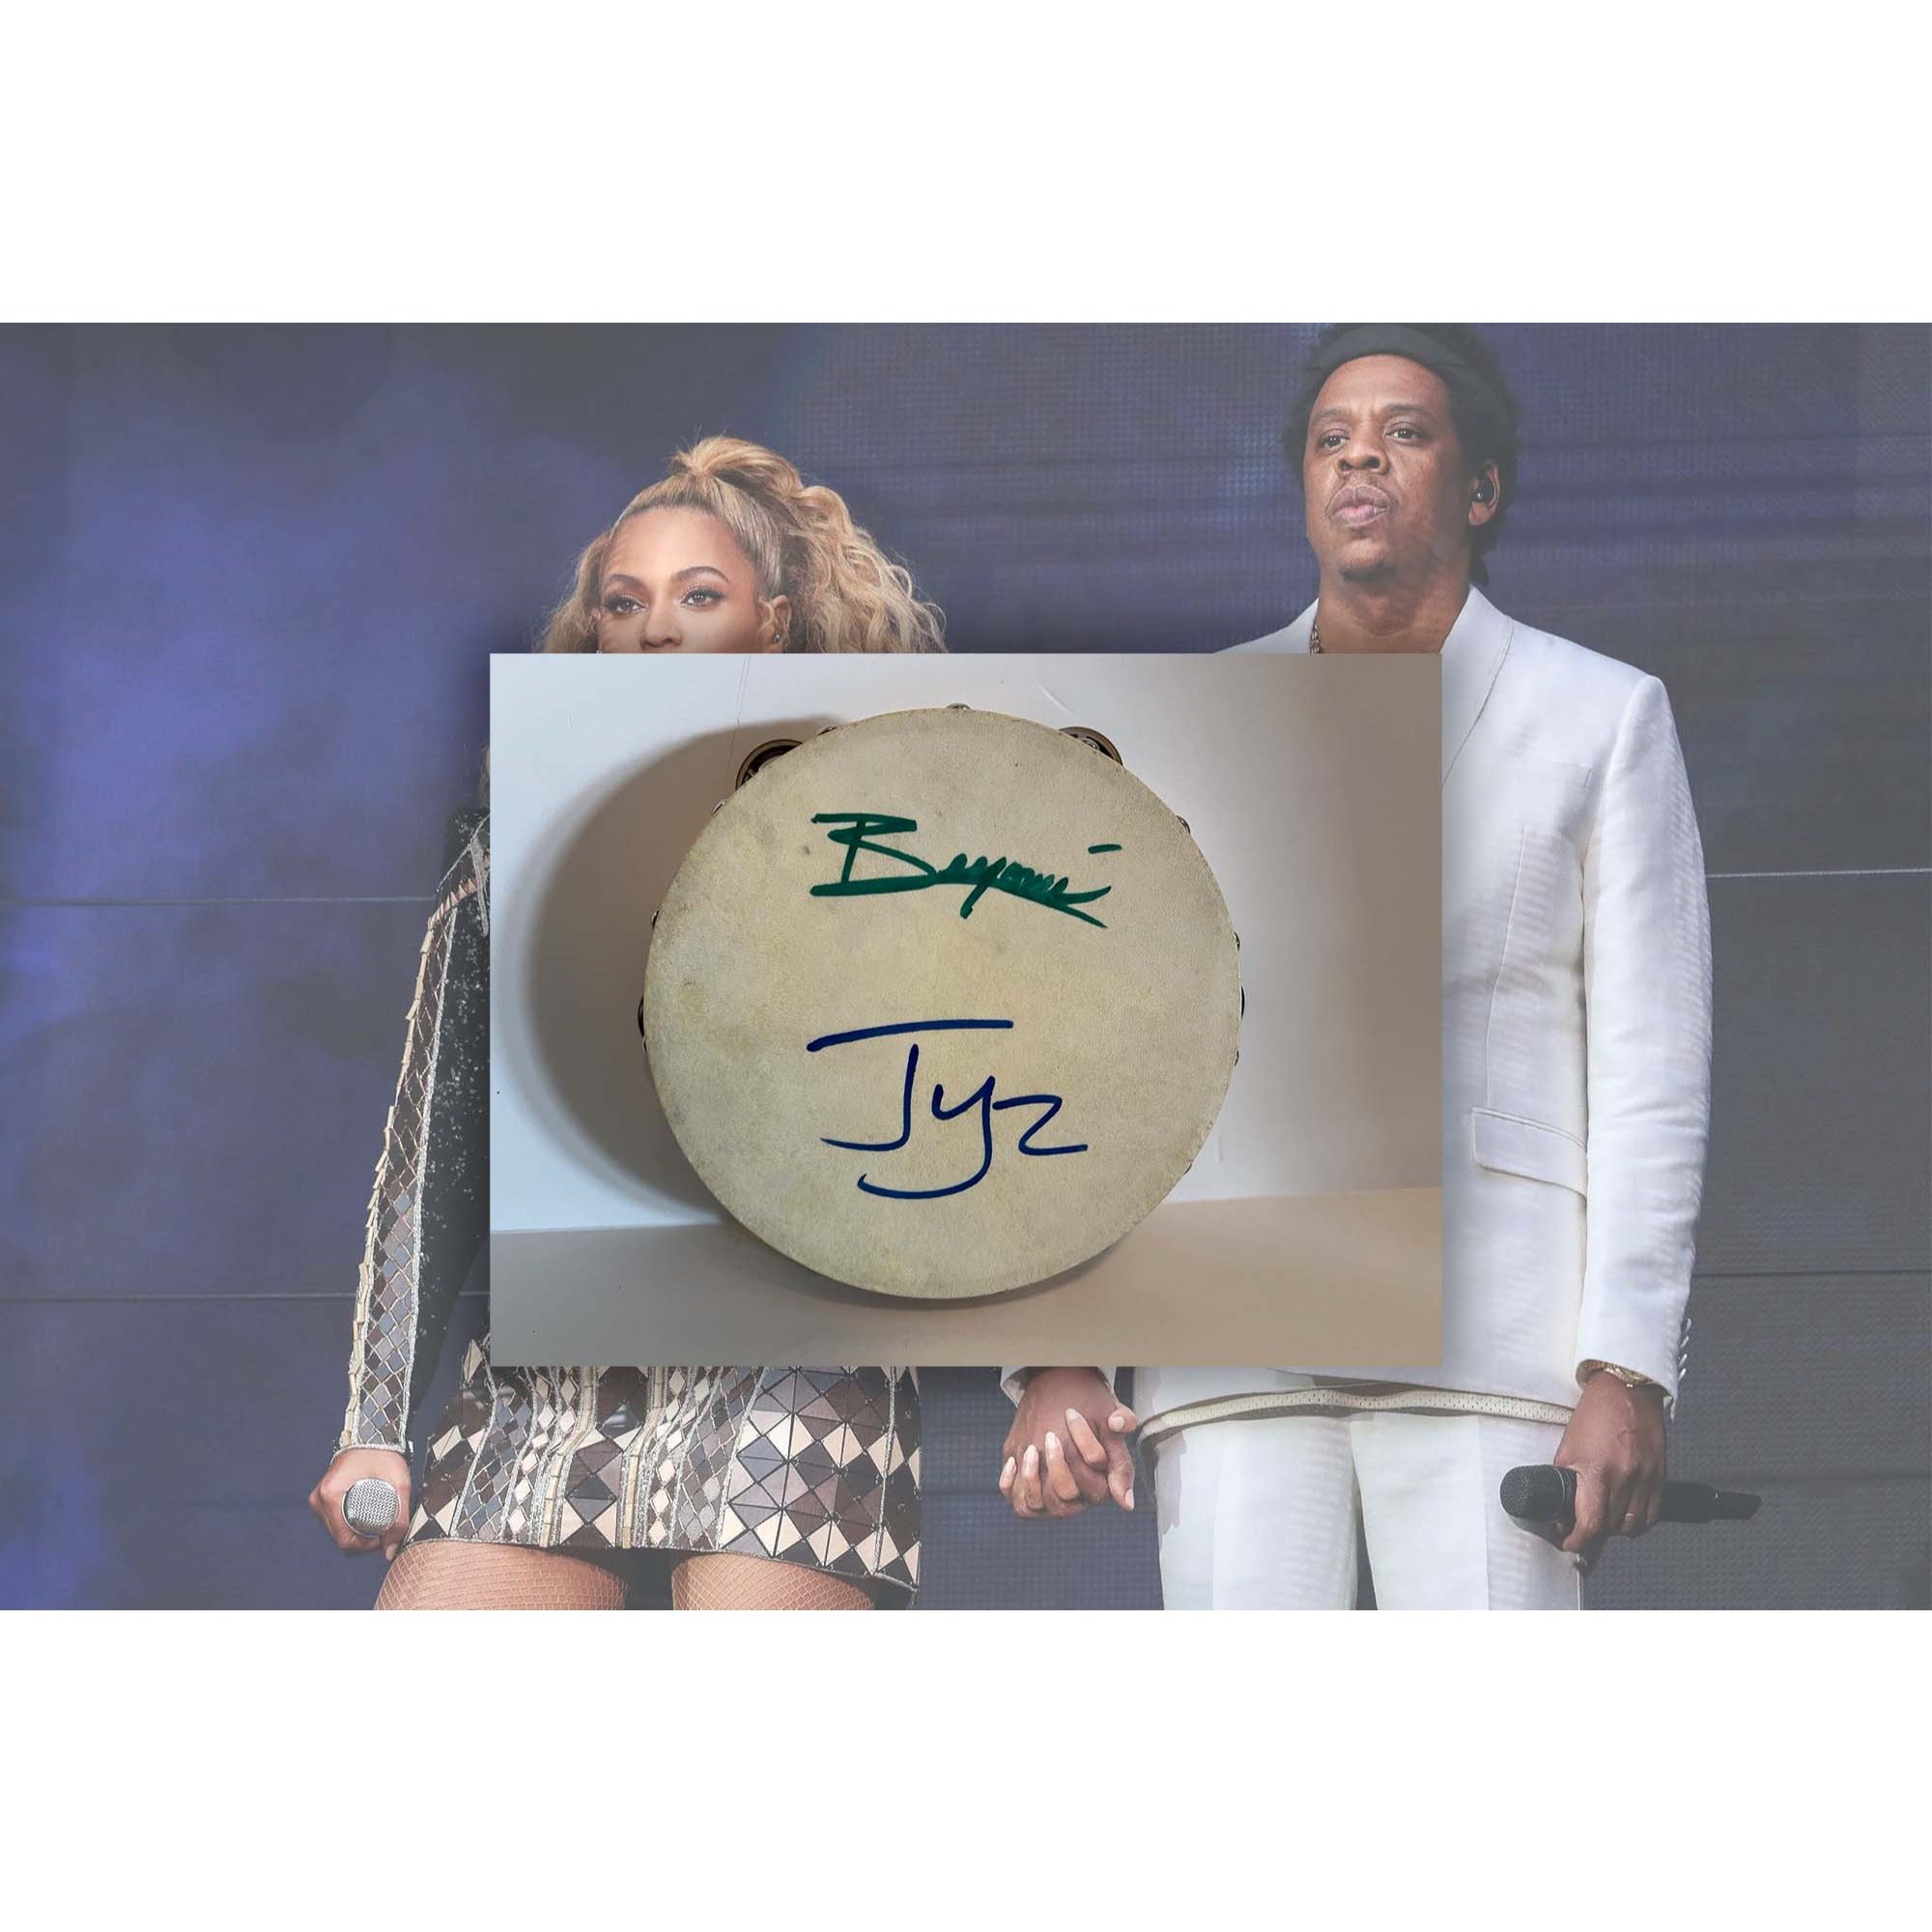 Beyonce Knowles  Shawn "JAY-Z" Carter tambourine signed with proof